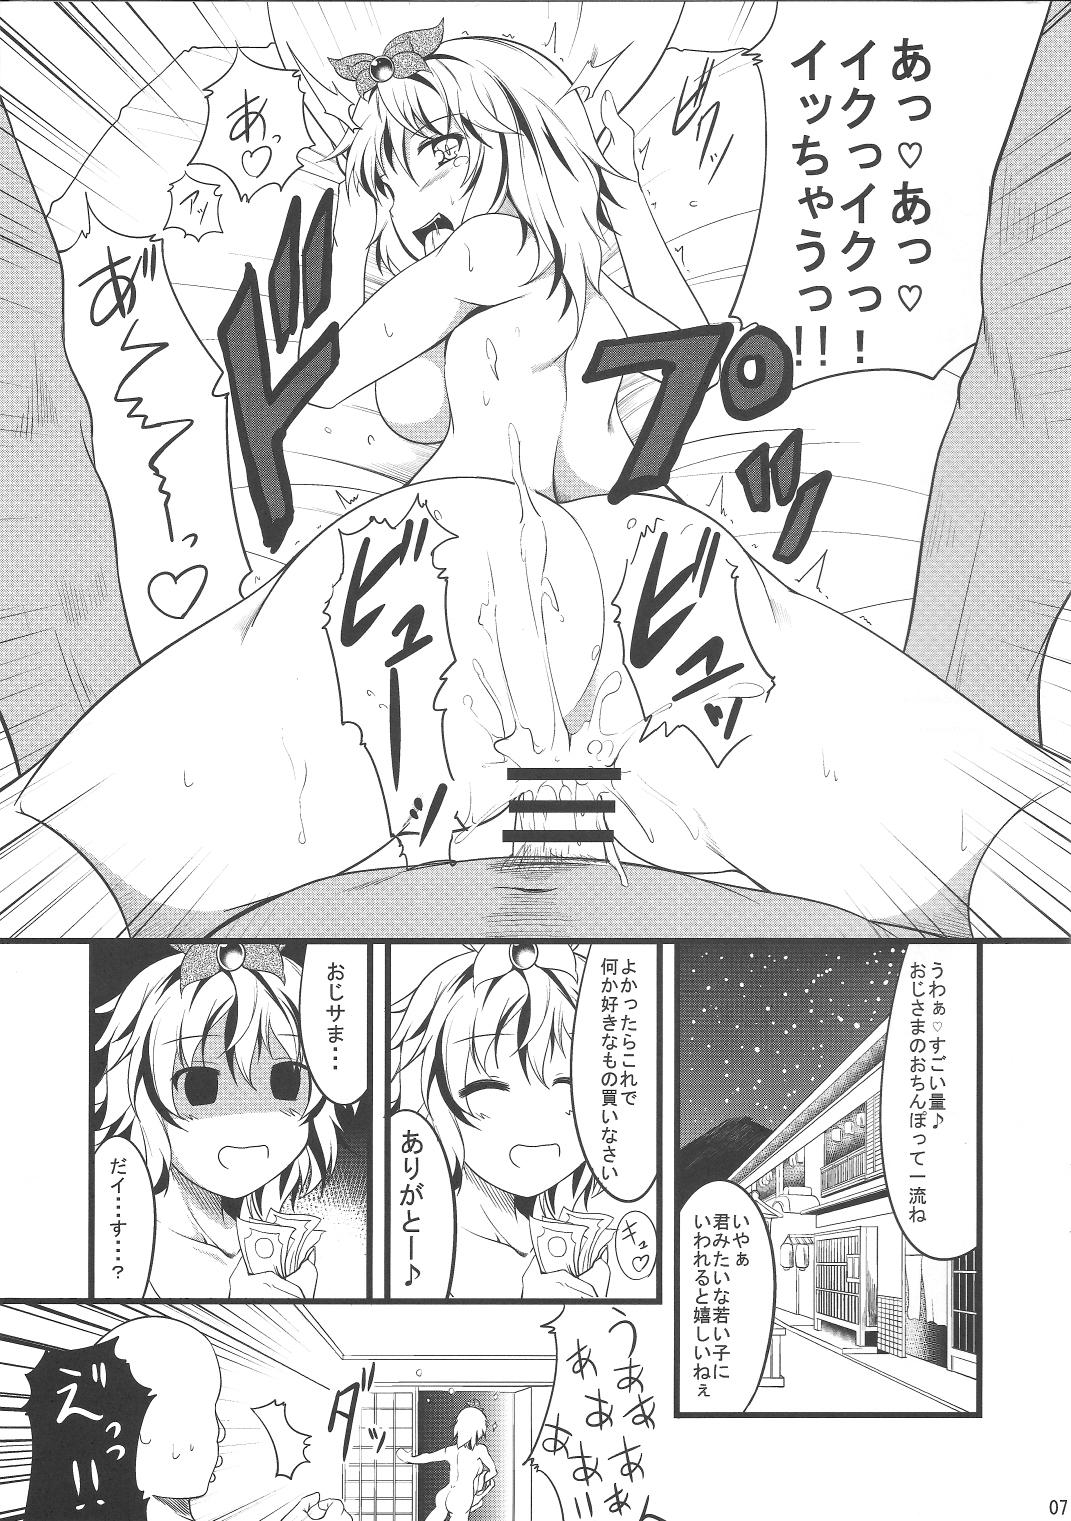 Amateur Jouyoku no Tora - Tiger of passion - Touhou project Exhib - Page 6